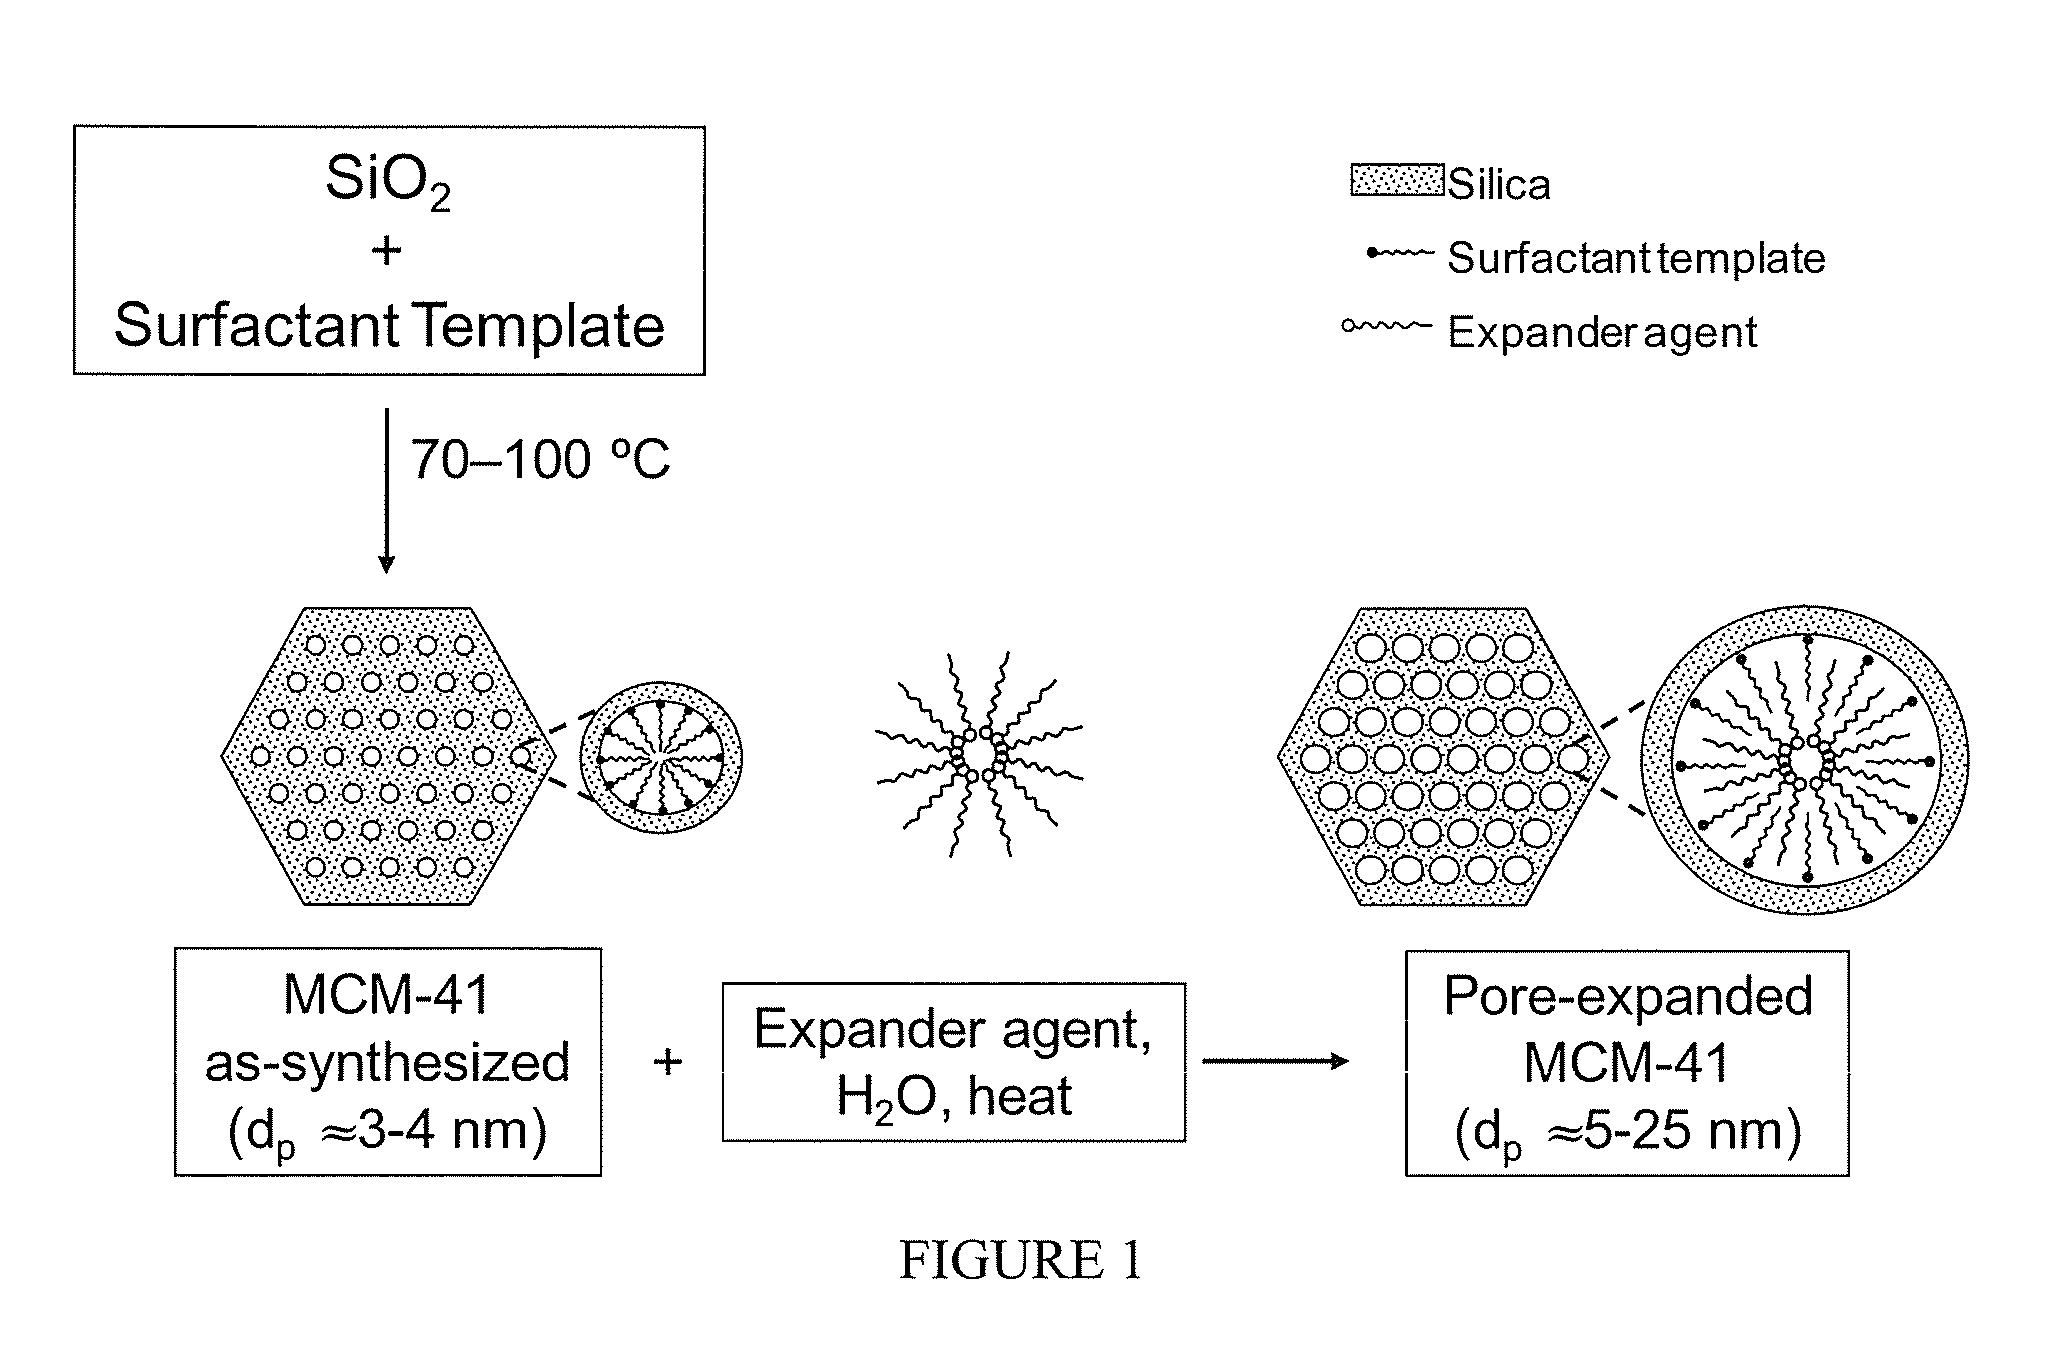 Materials, methods and systems for selective capture of CO2 at high pressure